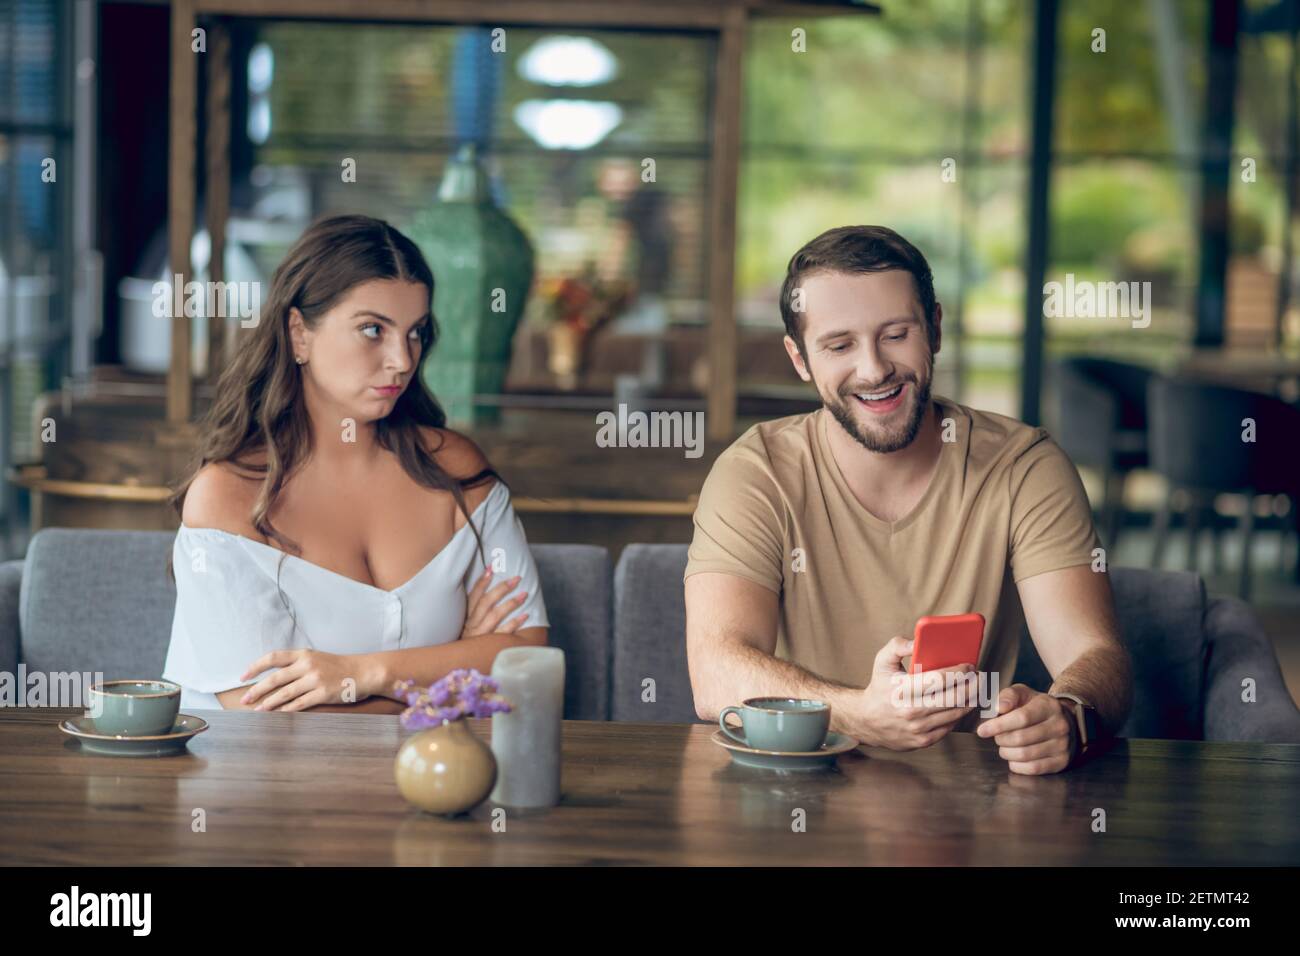 Laughing man with smartphone and sad woman Stock Photo